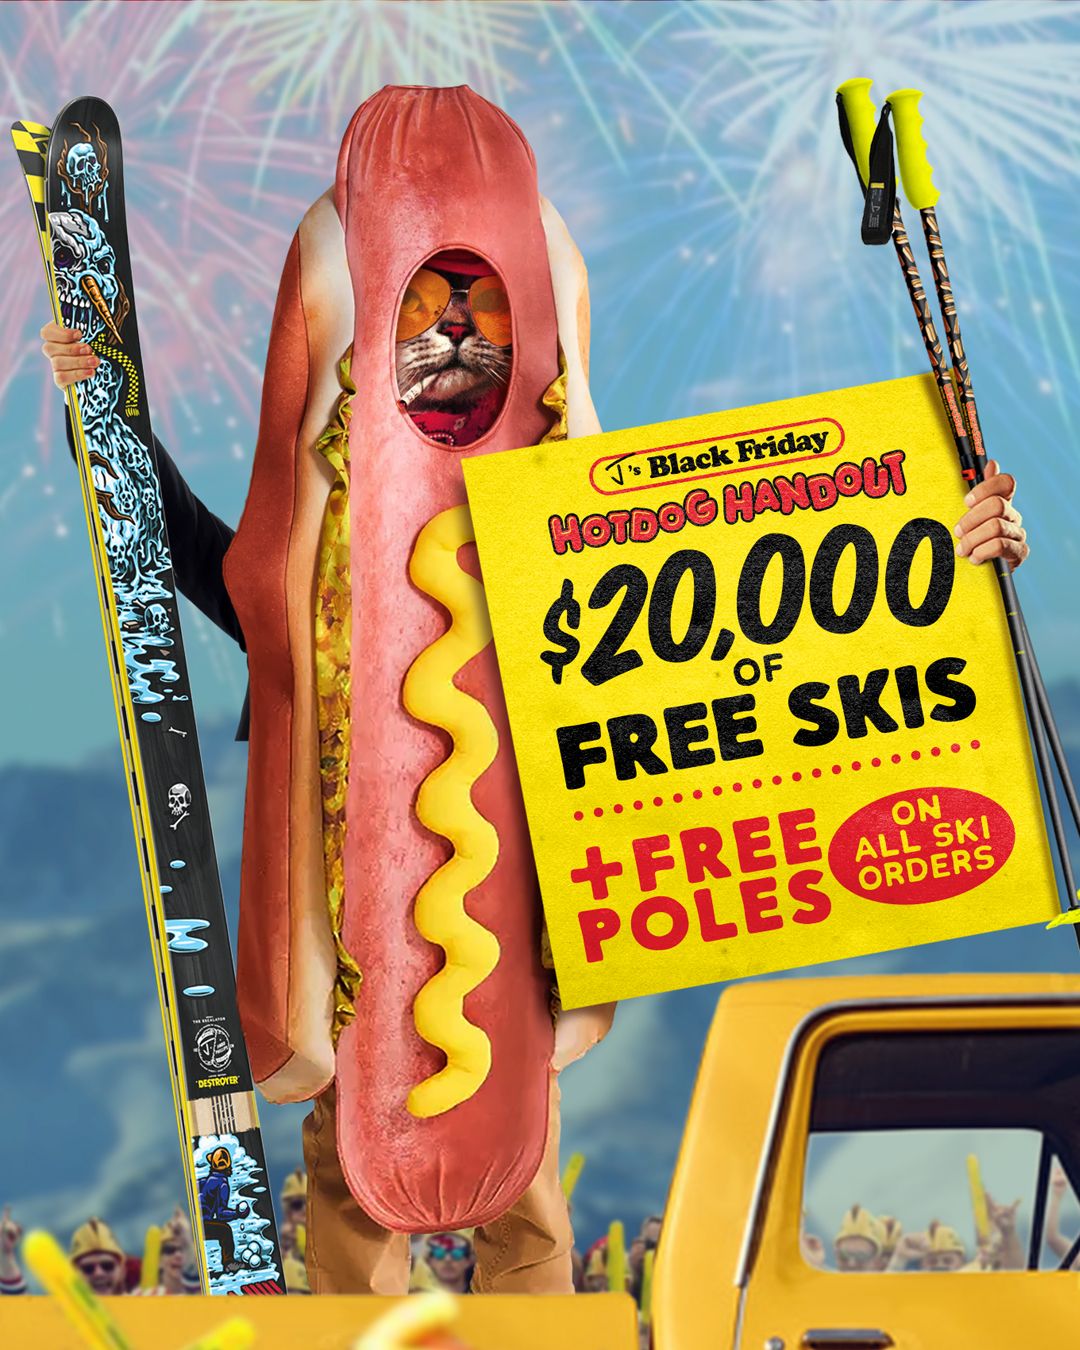 J skis hotdog handout $20,000 of free skis and free poles with all ski orders